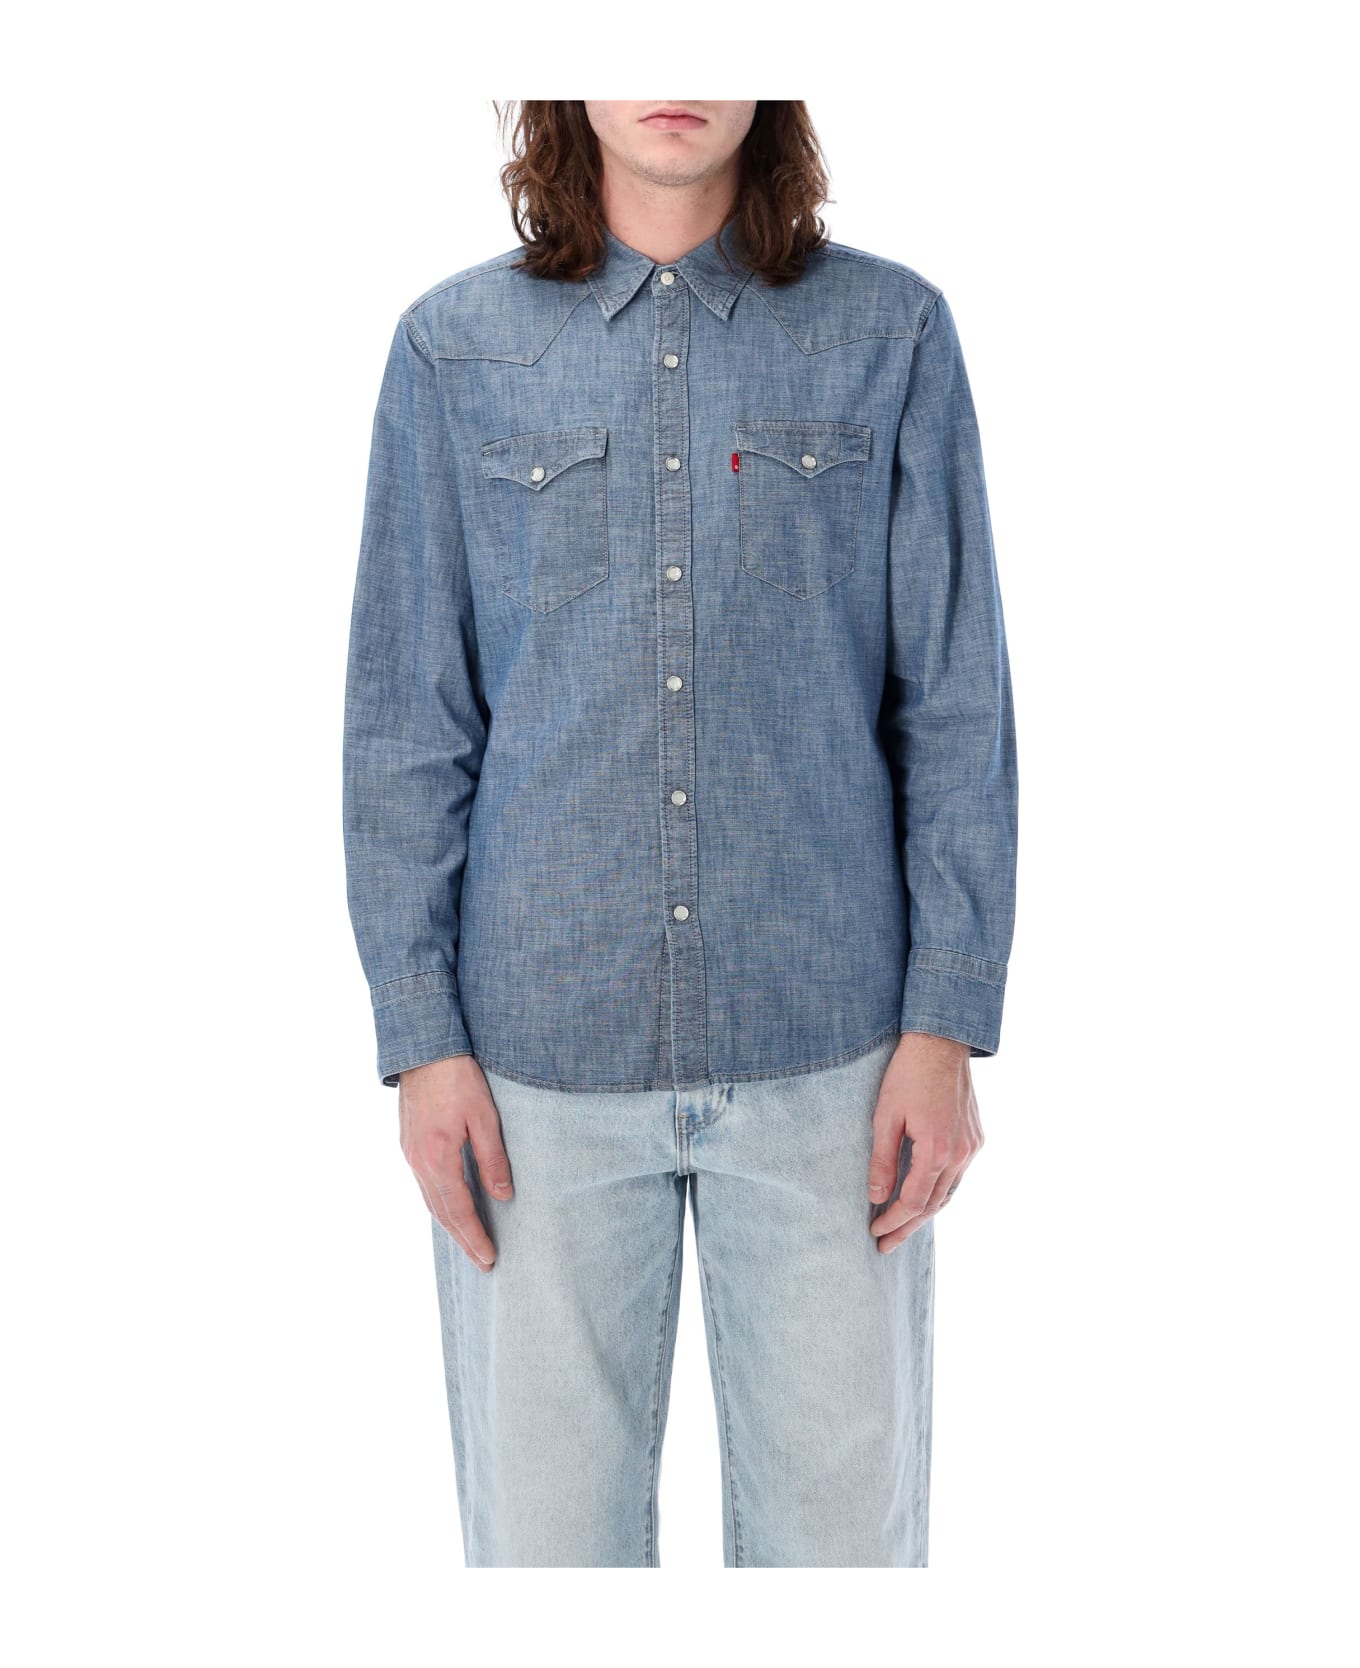 Levi's Barstow Western Shirt - MED BLUE